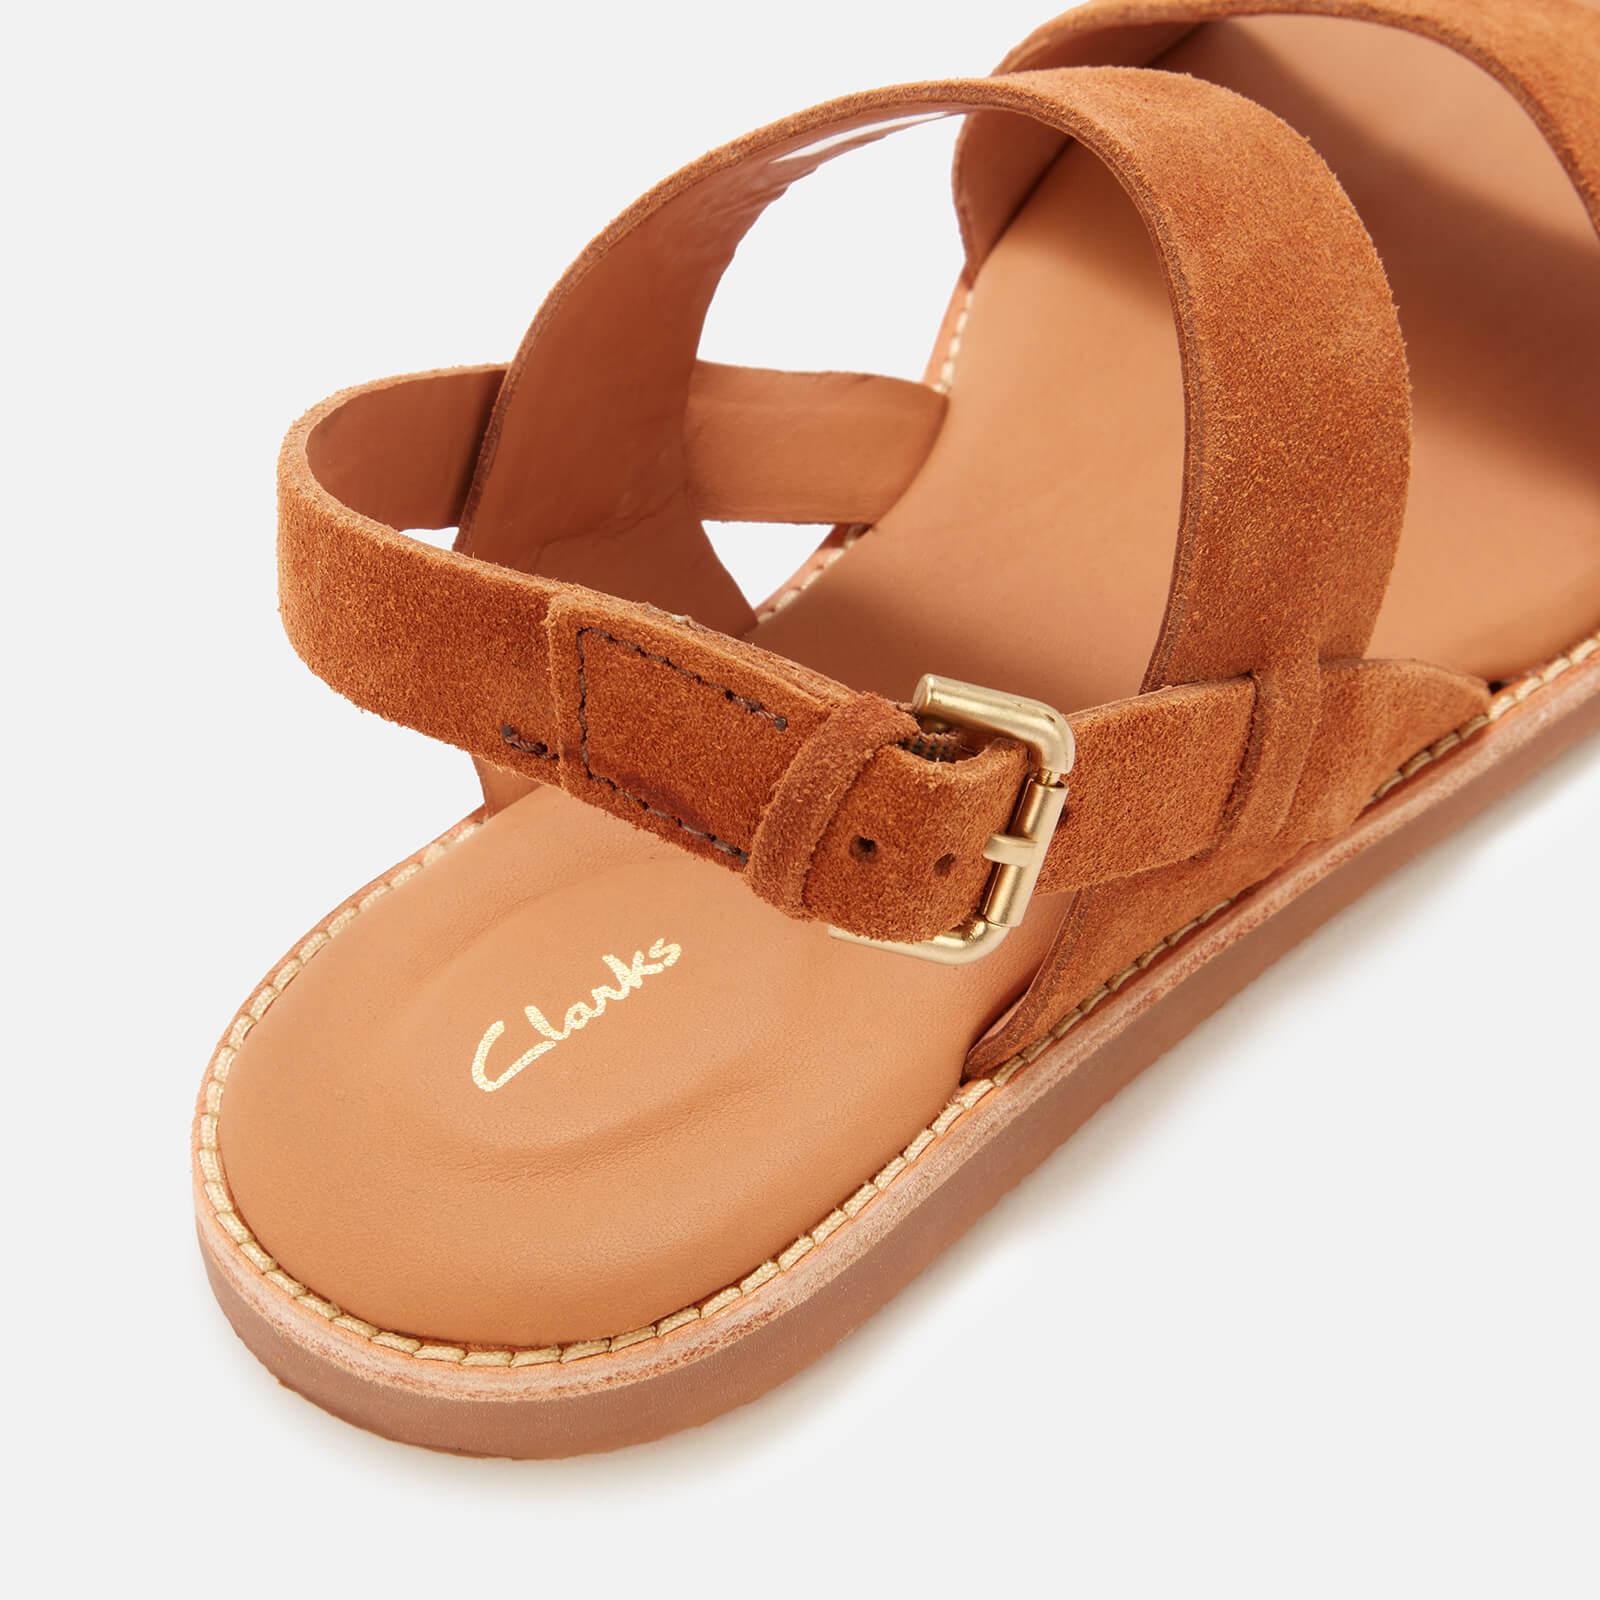 Clarks Karsea Strap Leather Flat Sandals in Tan (Brown) - Lyst